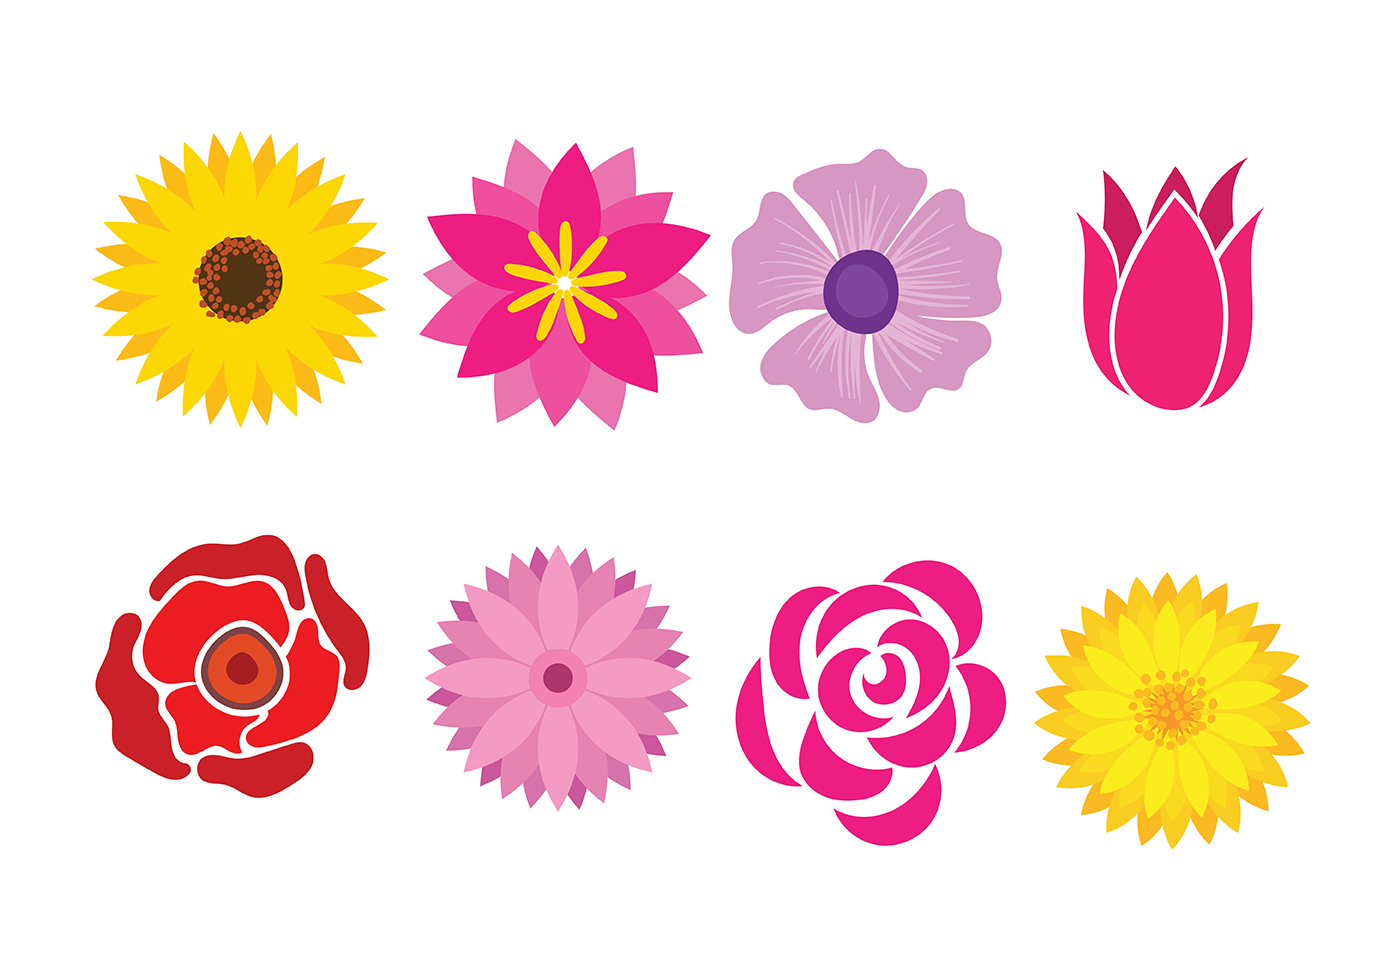 Flower Icon Vector 138451 Download Free Vectors, Clipart